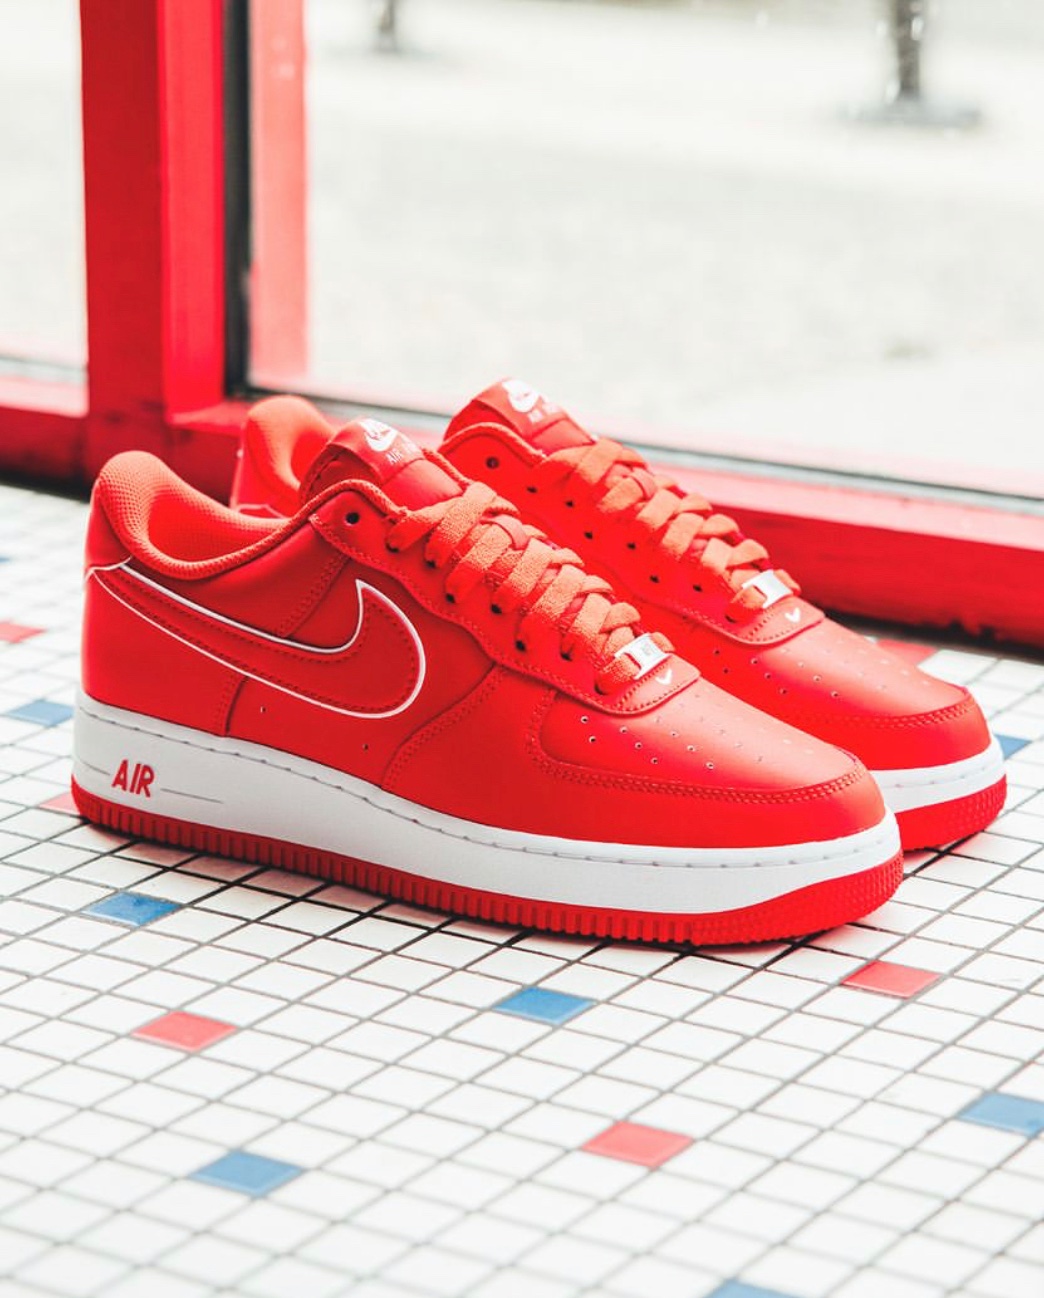 SNKR_TWITR on X: AD: $88 each w/code SPRING NEW Nike Air Force 1 '07  Picante Red  Black/White  25%  off when you buy both or 2 pairs with same code  /